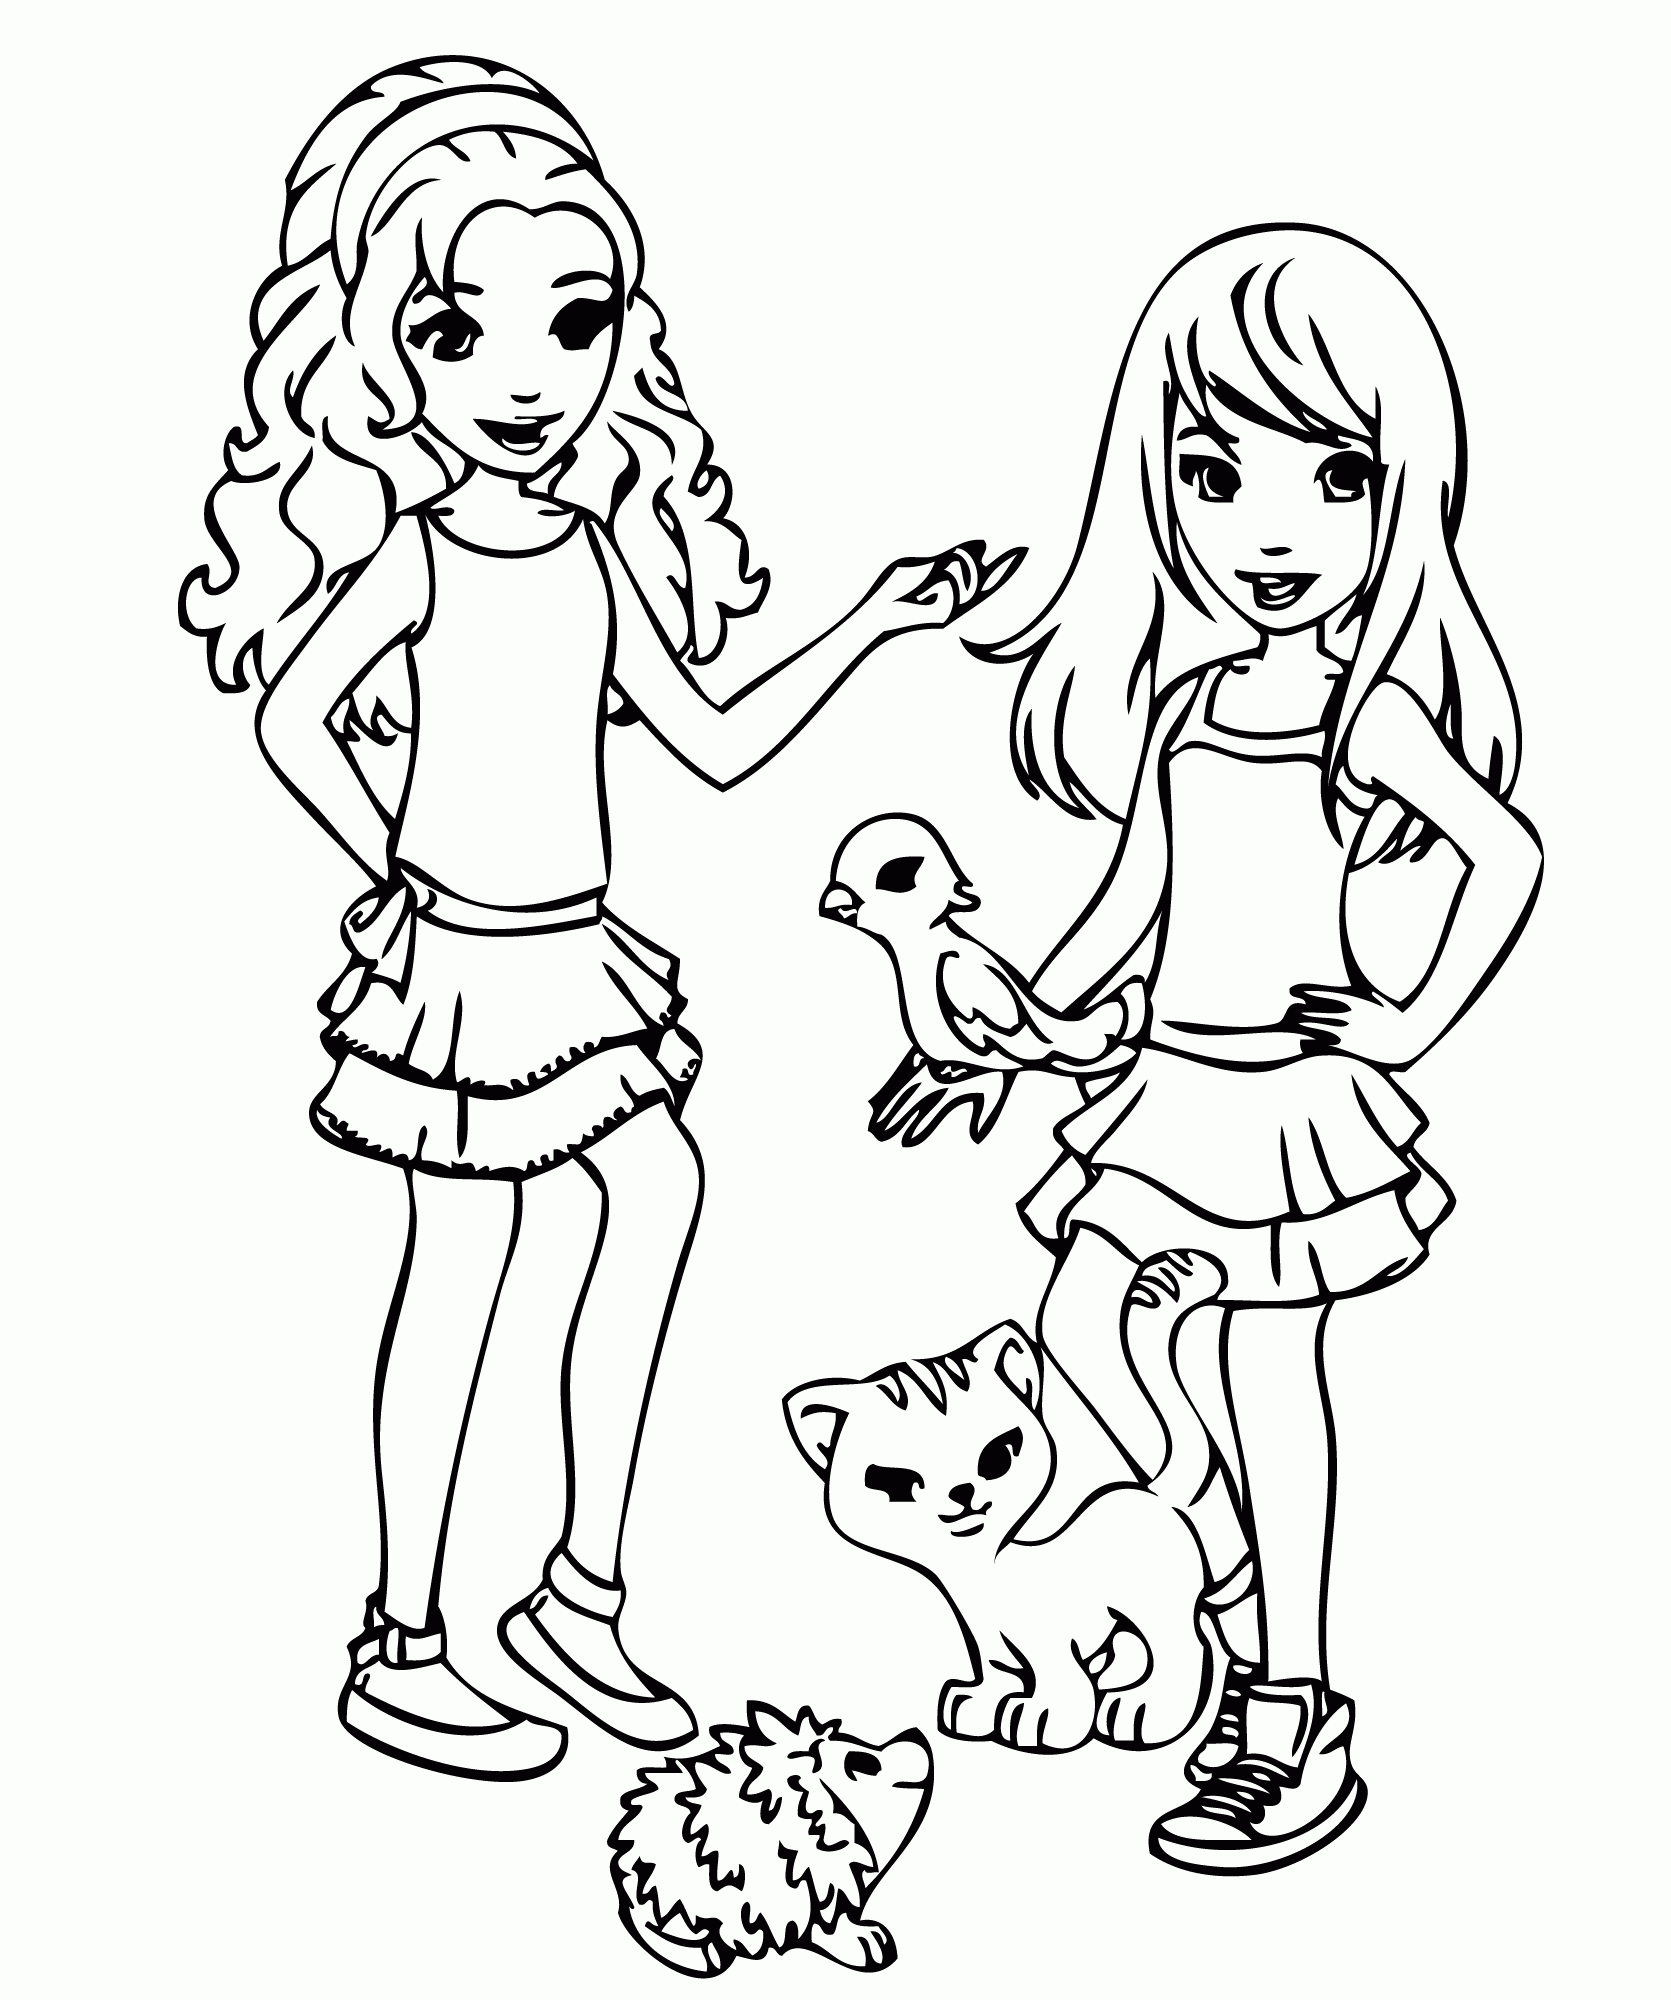 Lego Friends Coloring Pages Mia - High Quality Coloring Pages